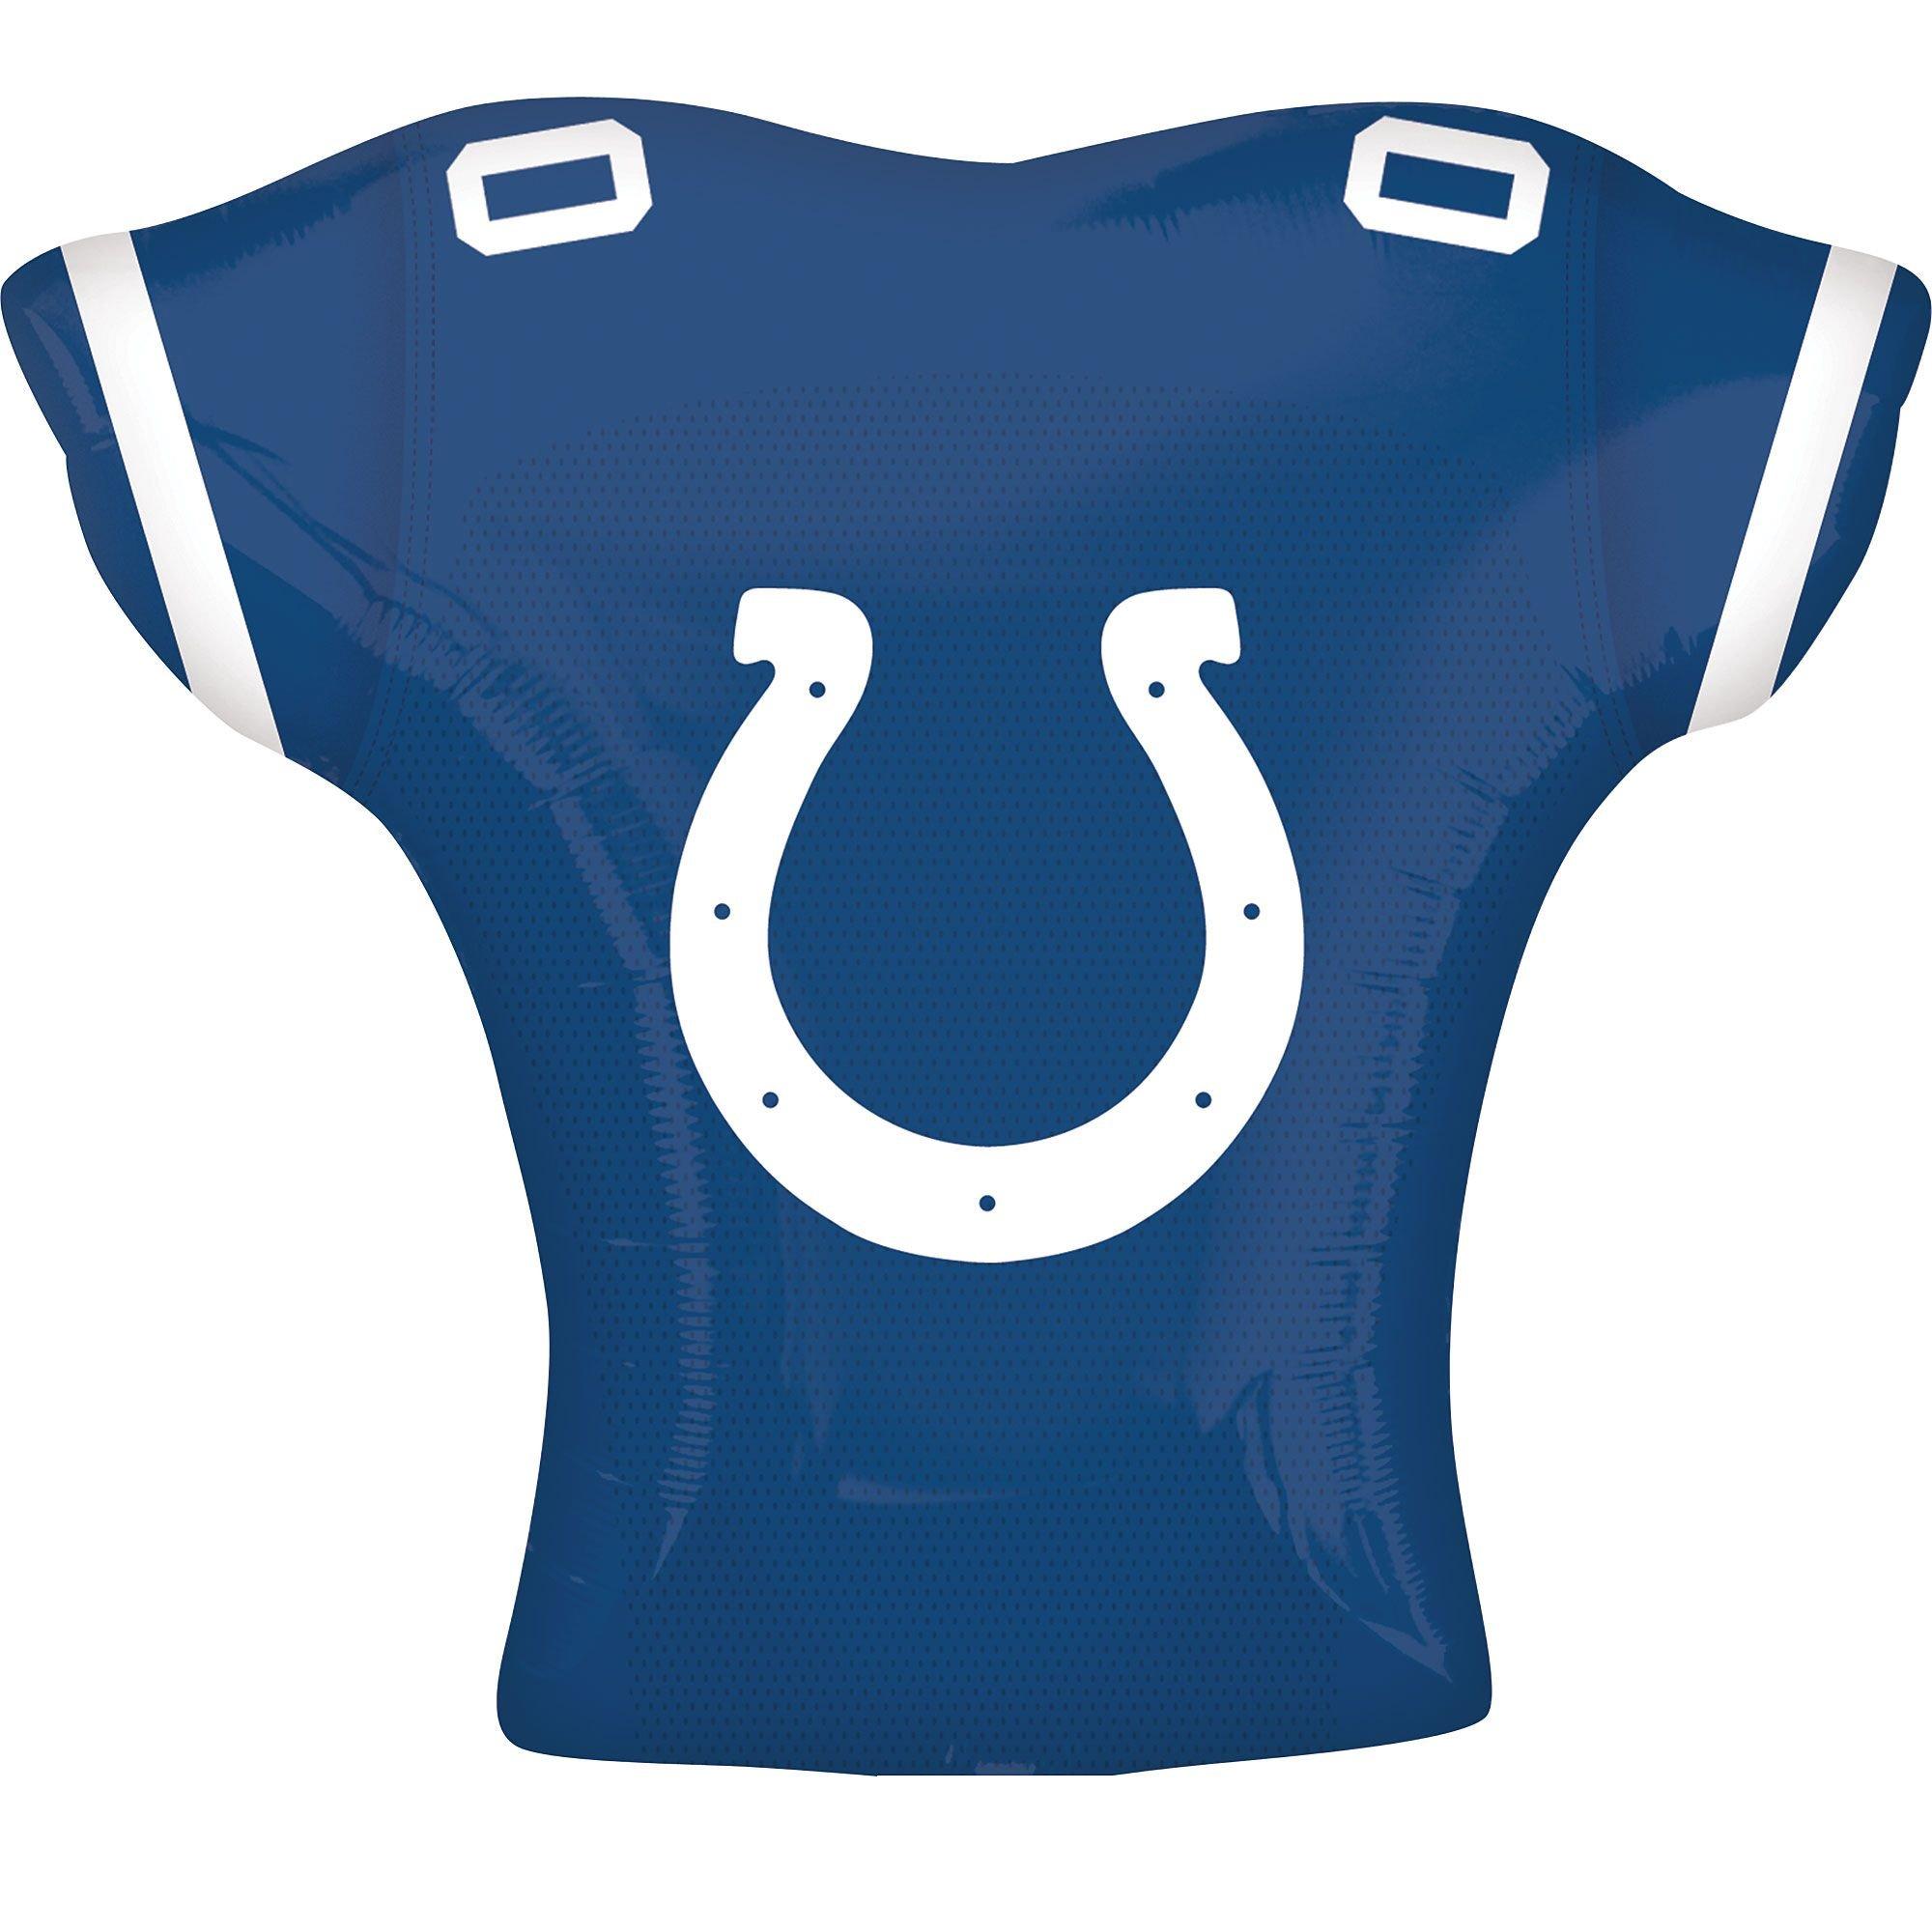 Indianapolis Colts player jersey delivery